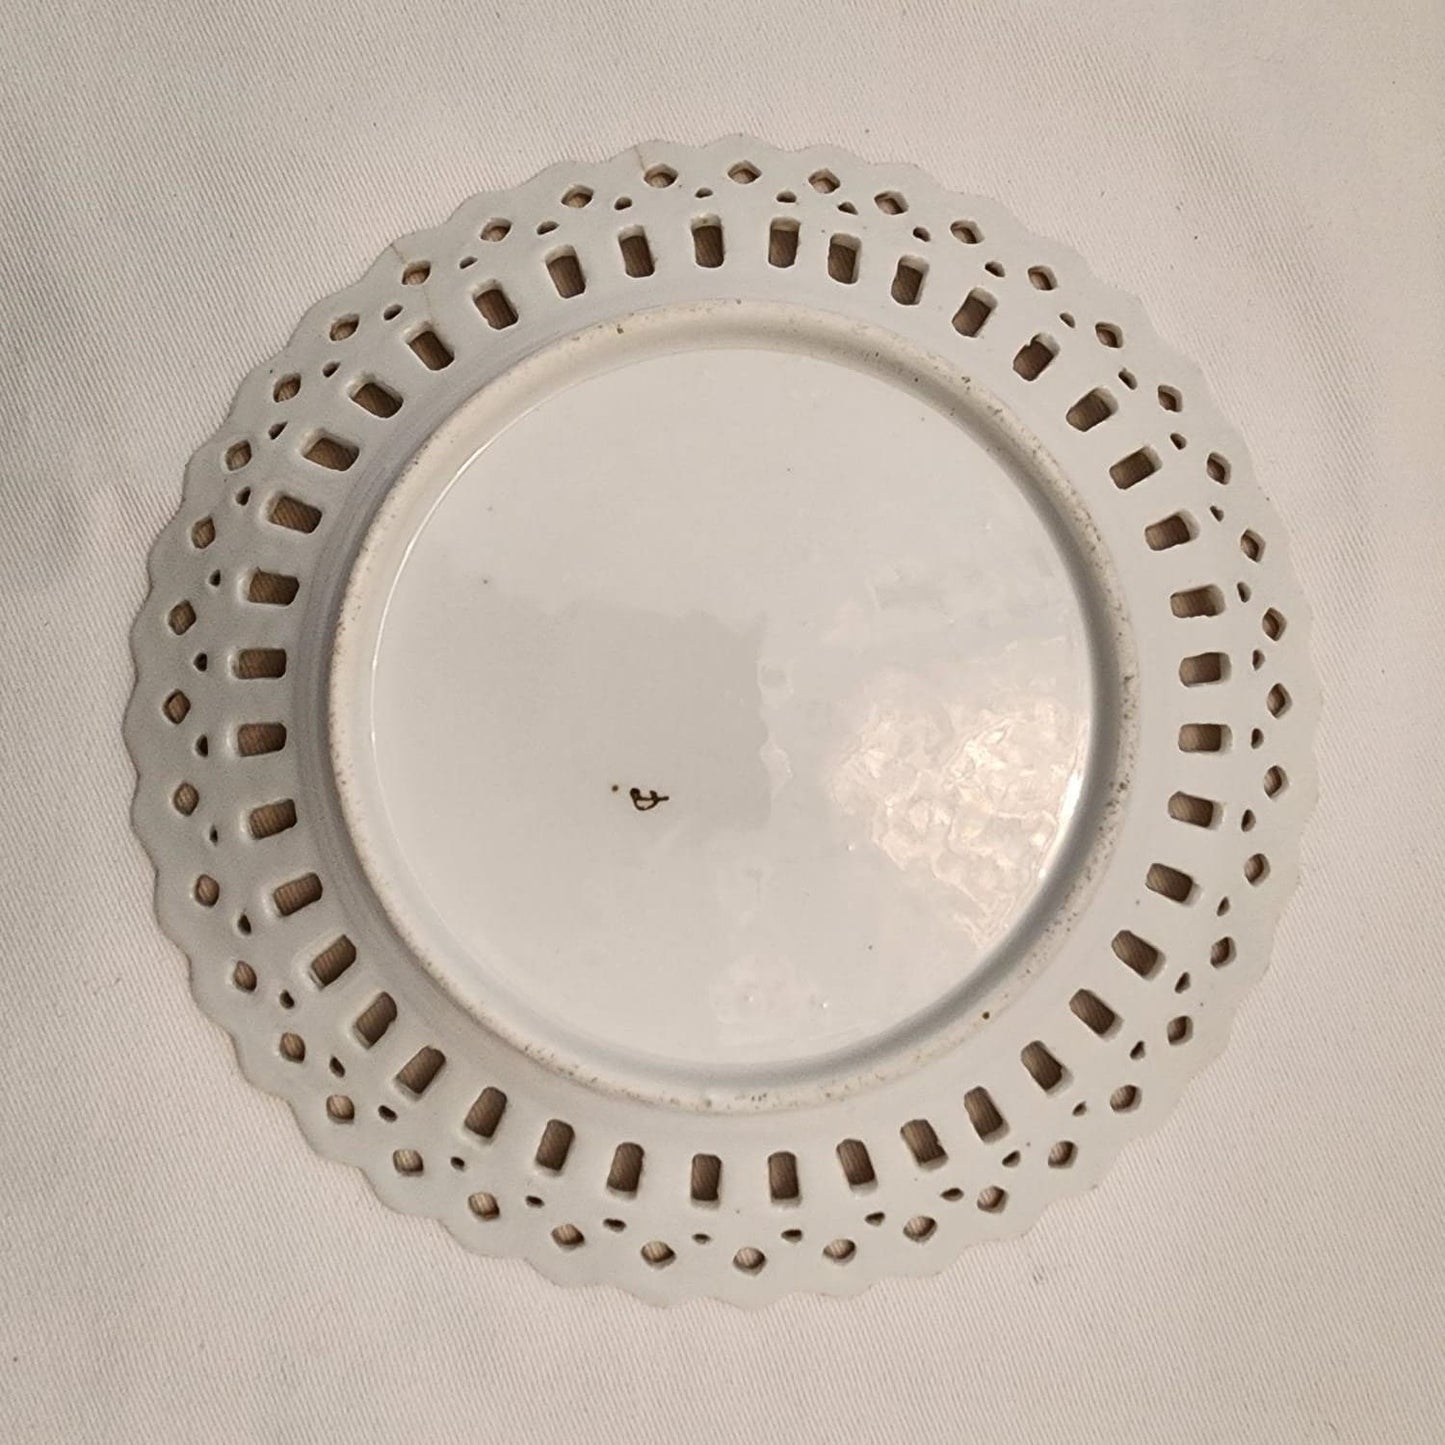 White plate with castle design.